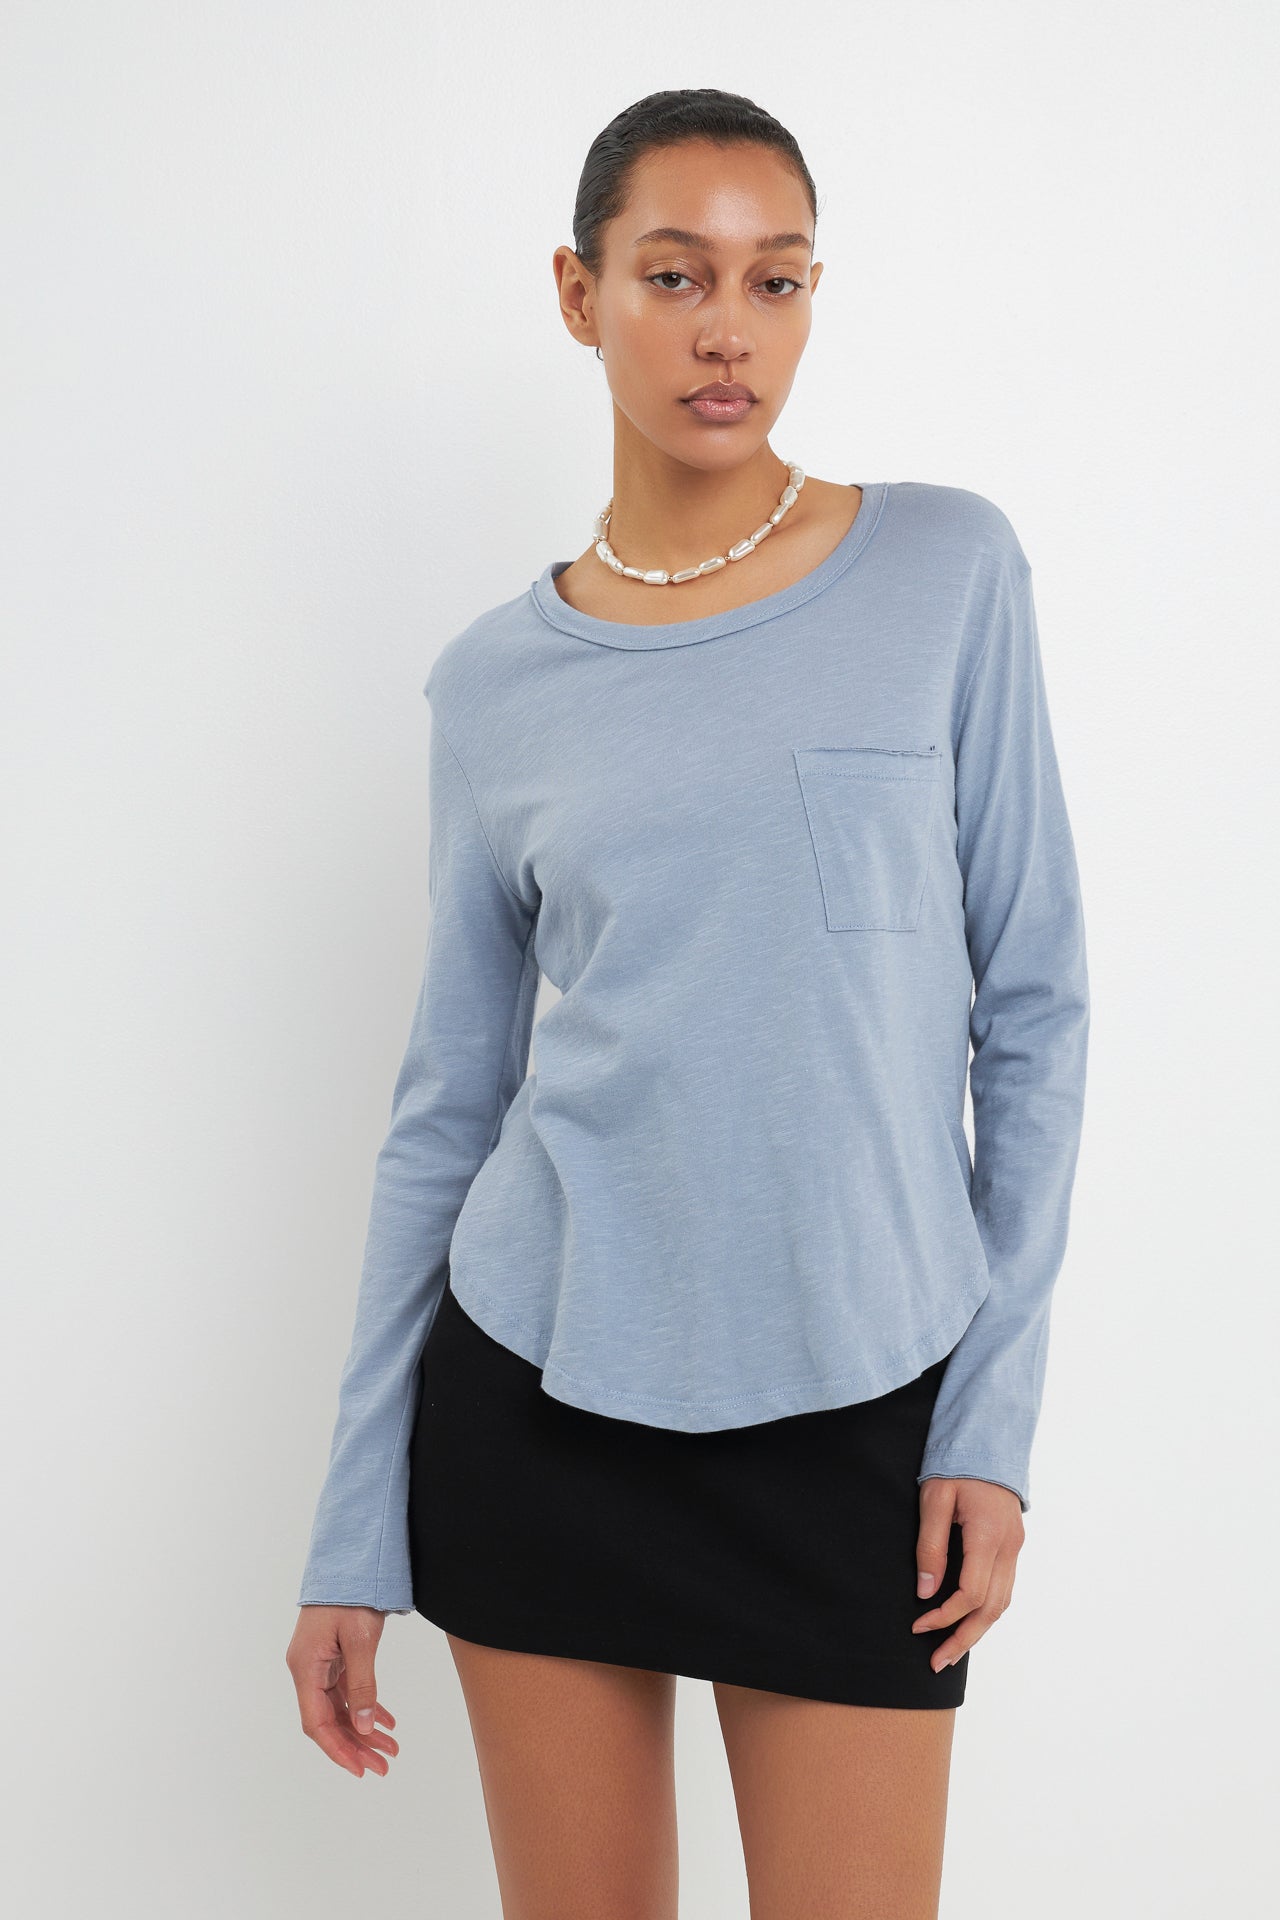 Classic Round Neck Long Sleeves